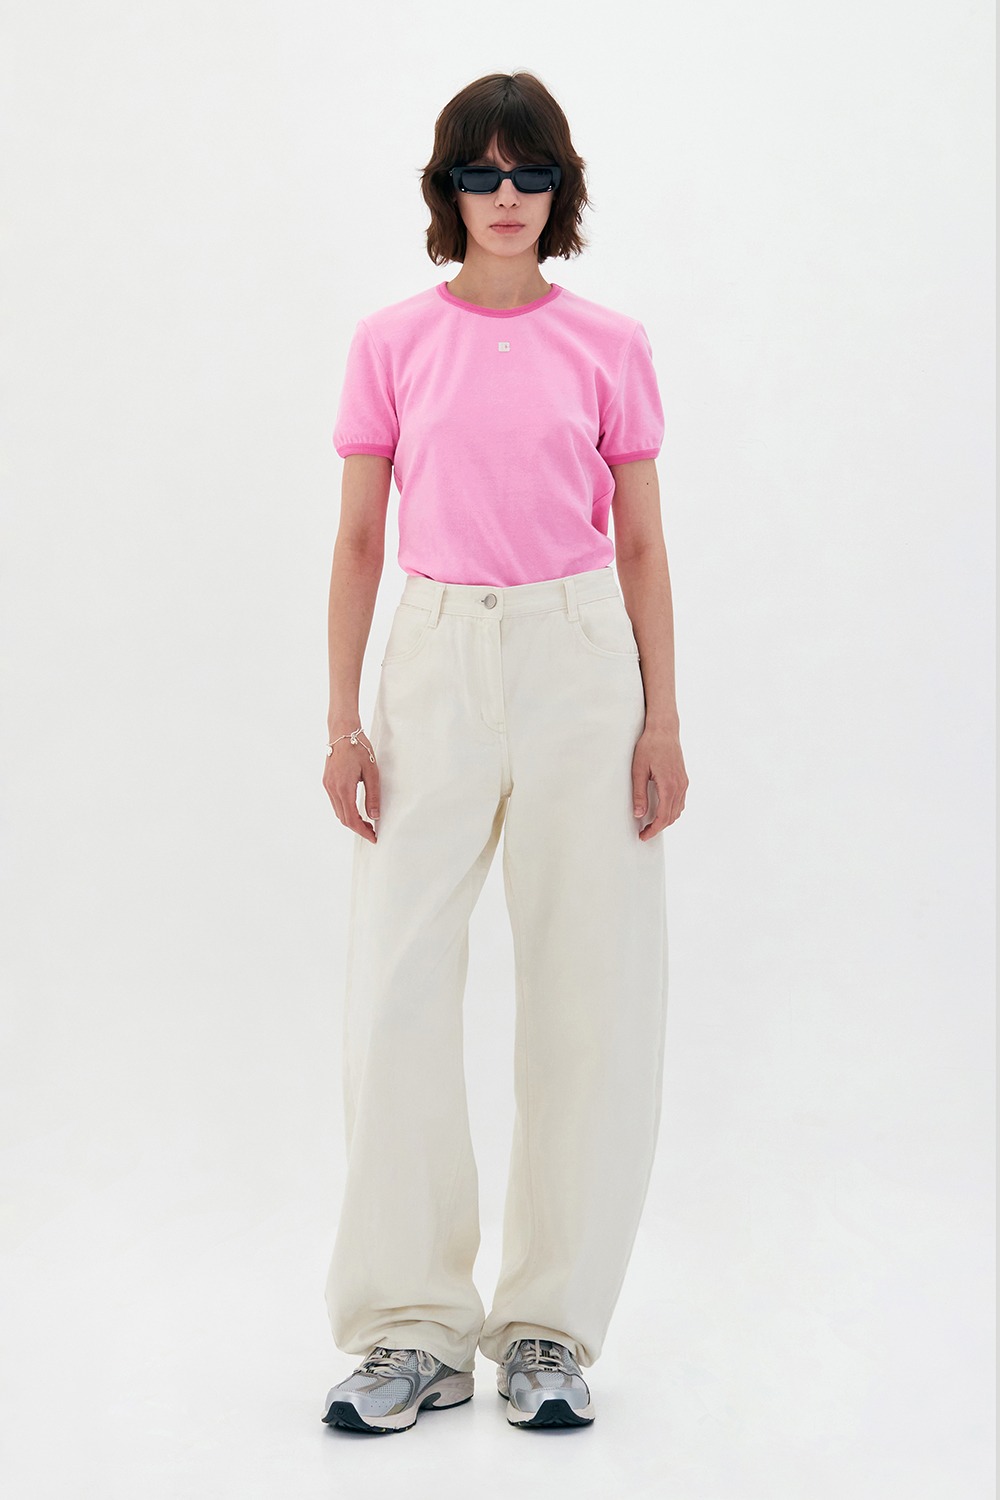 TERRY TOP - PINK